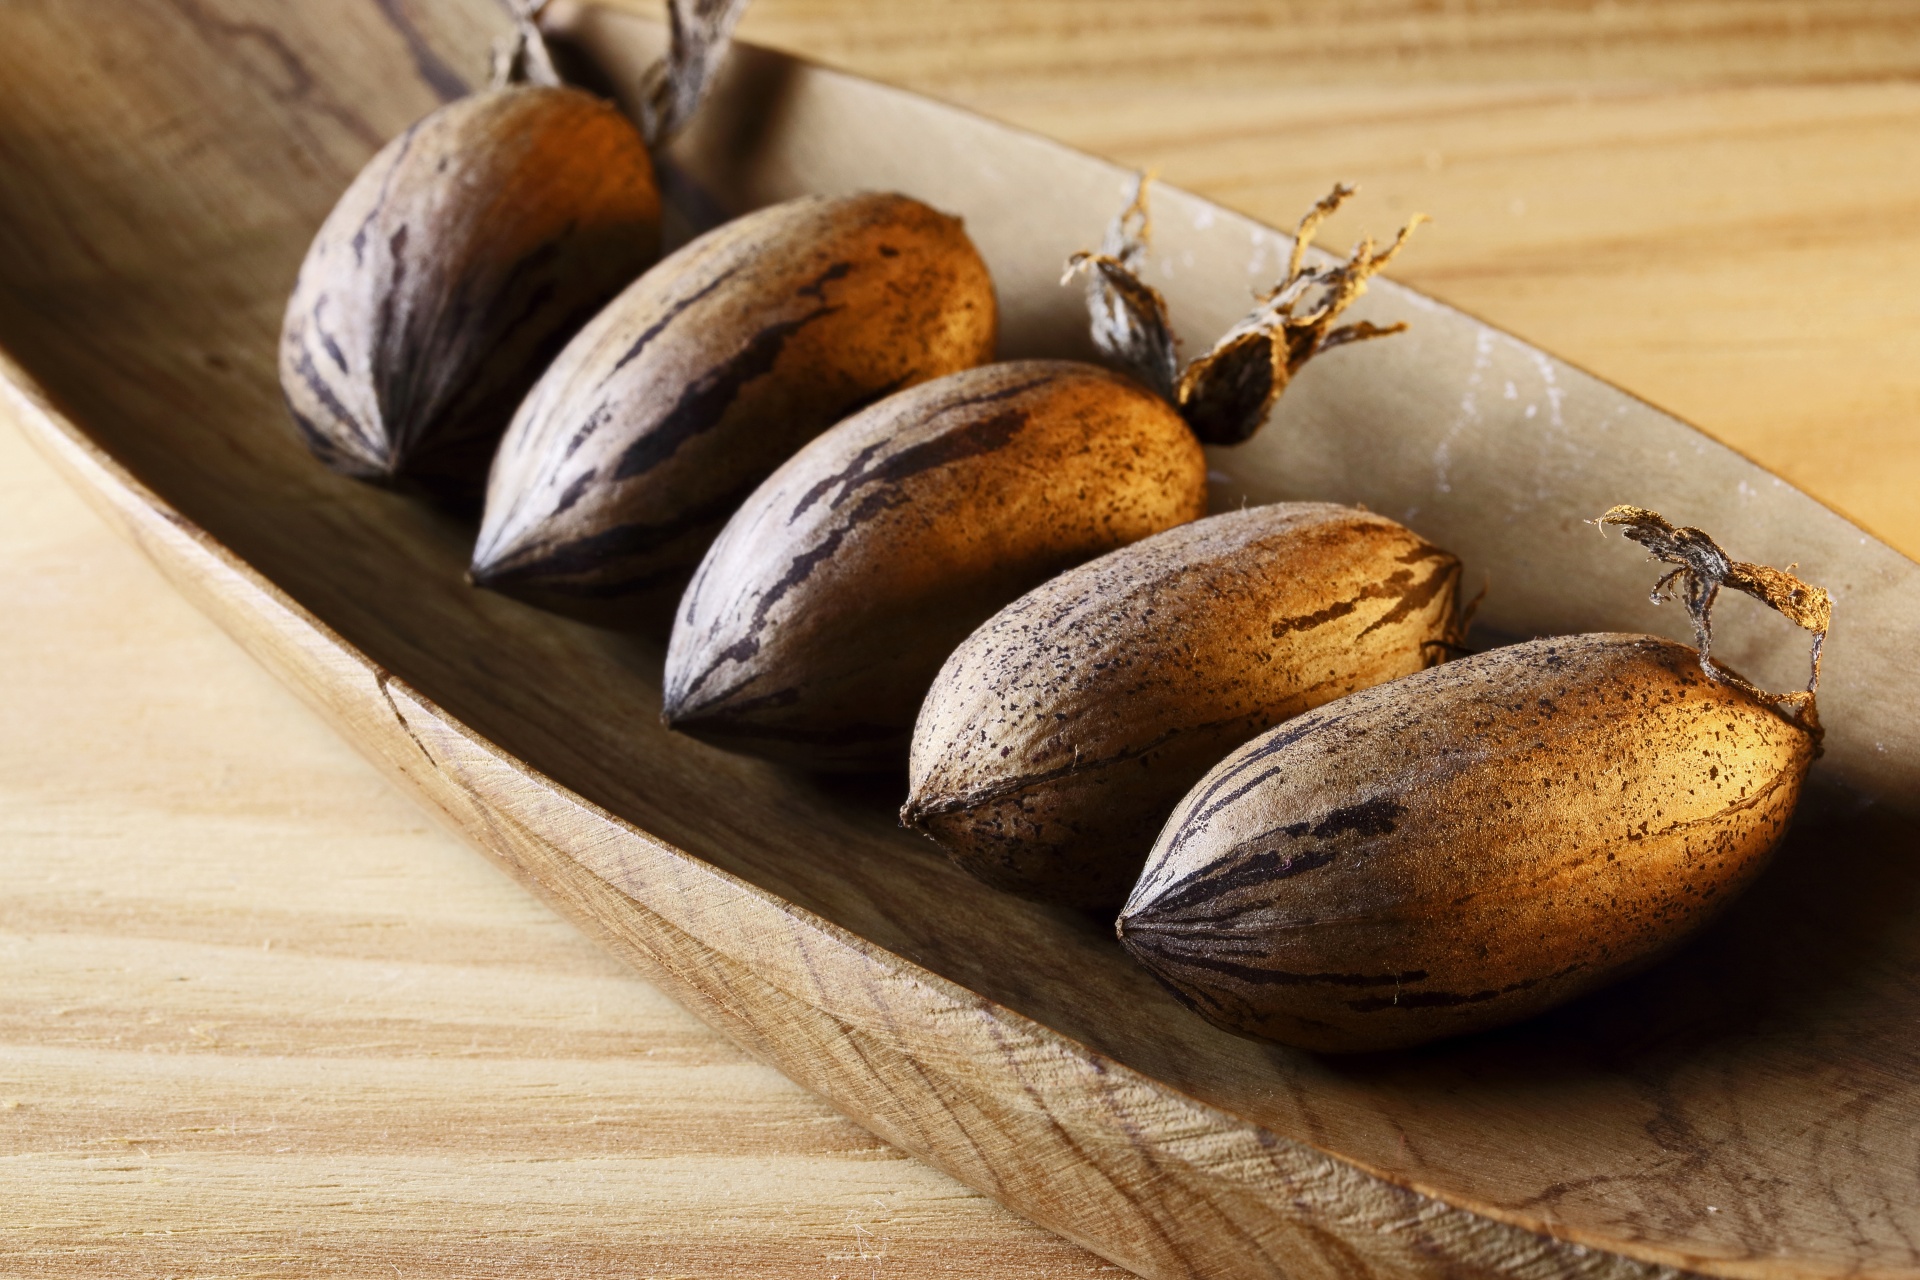 A Row Of Pecan Nuts In Wooden Bowl